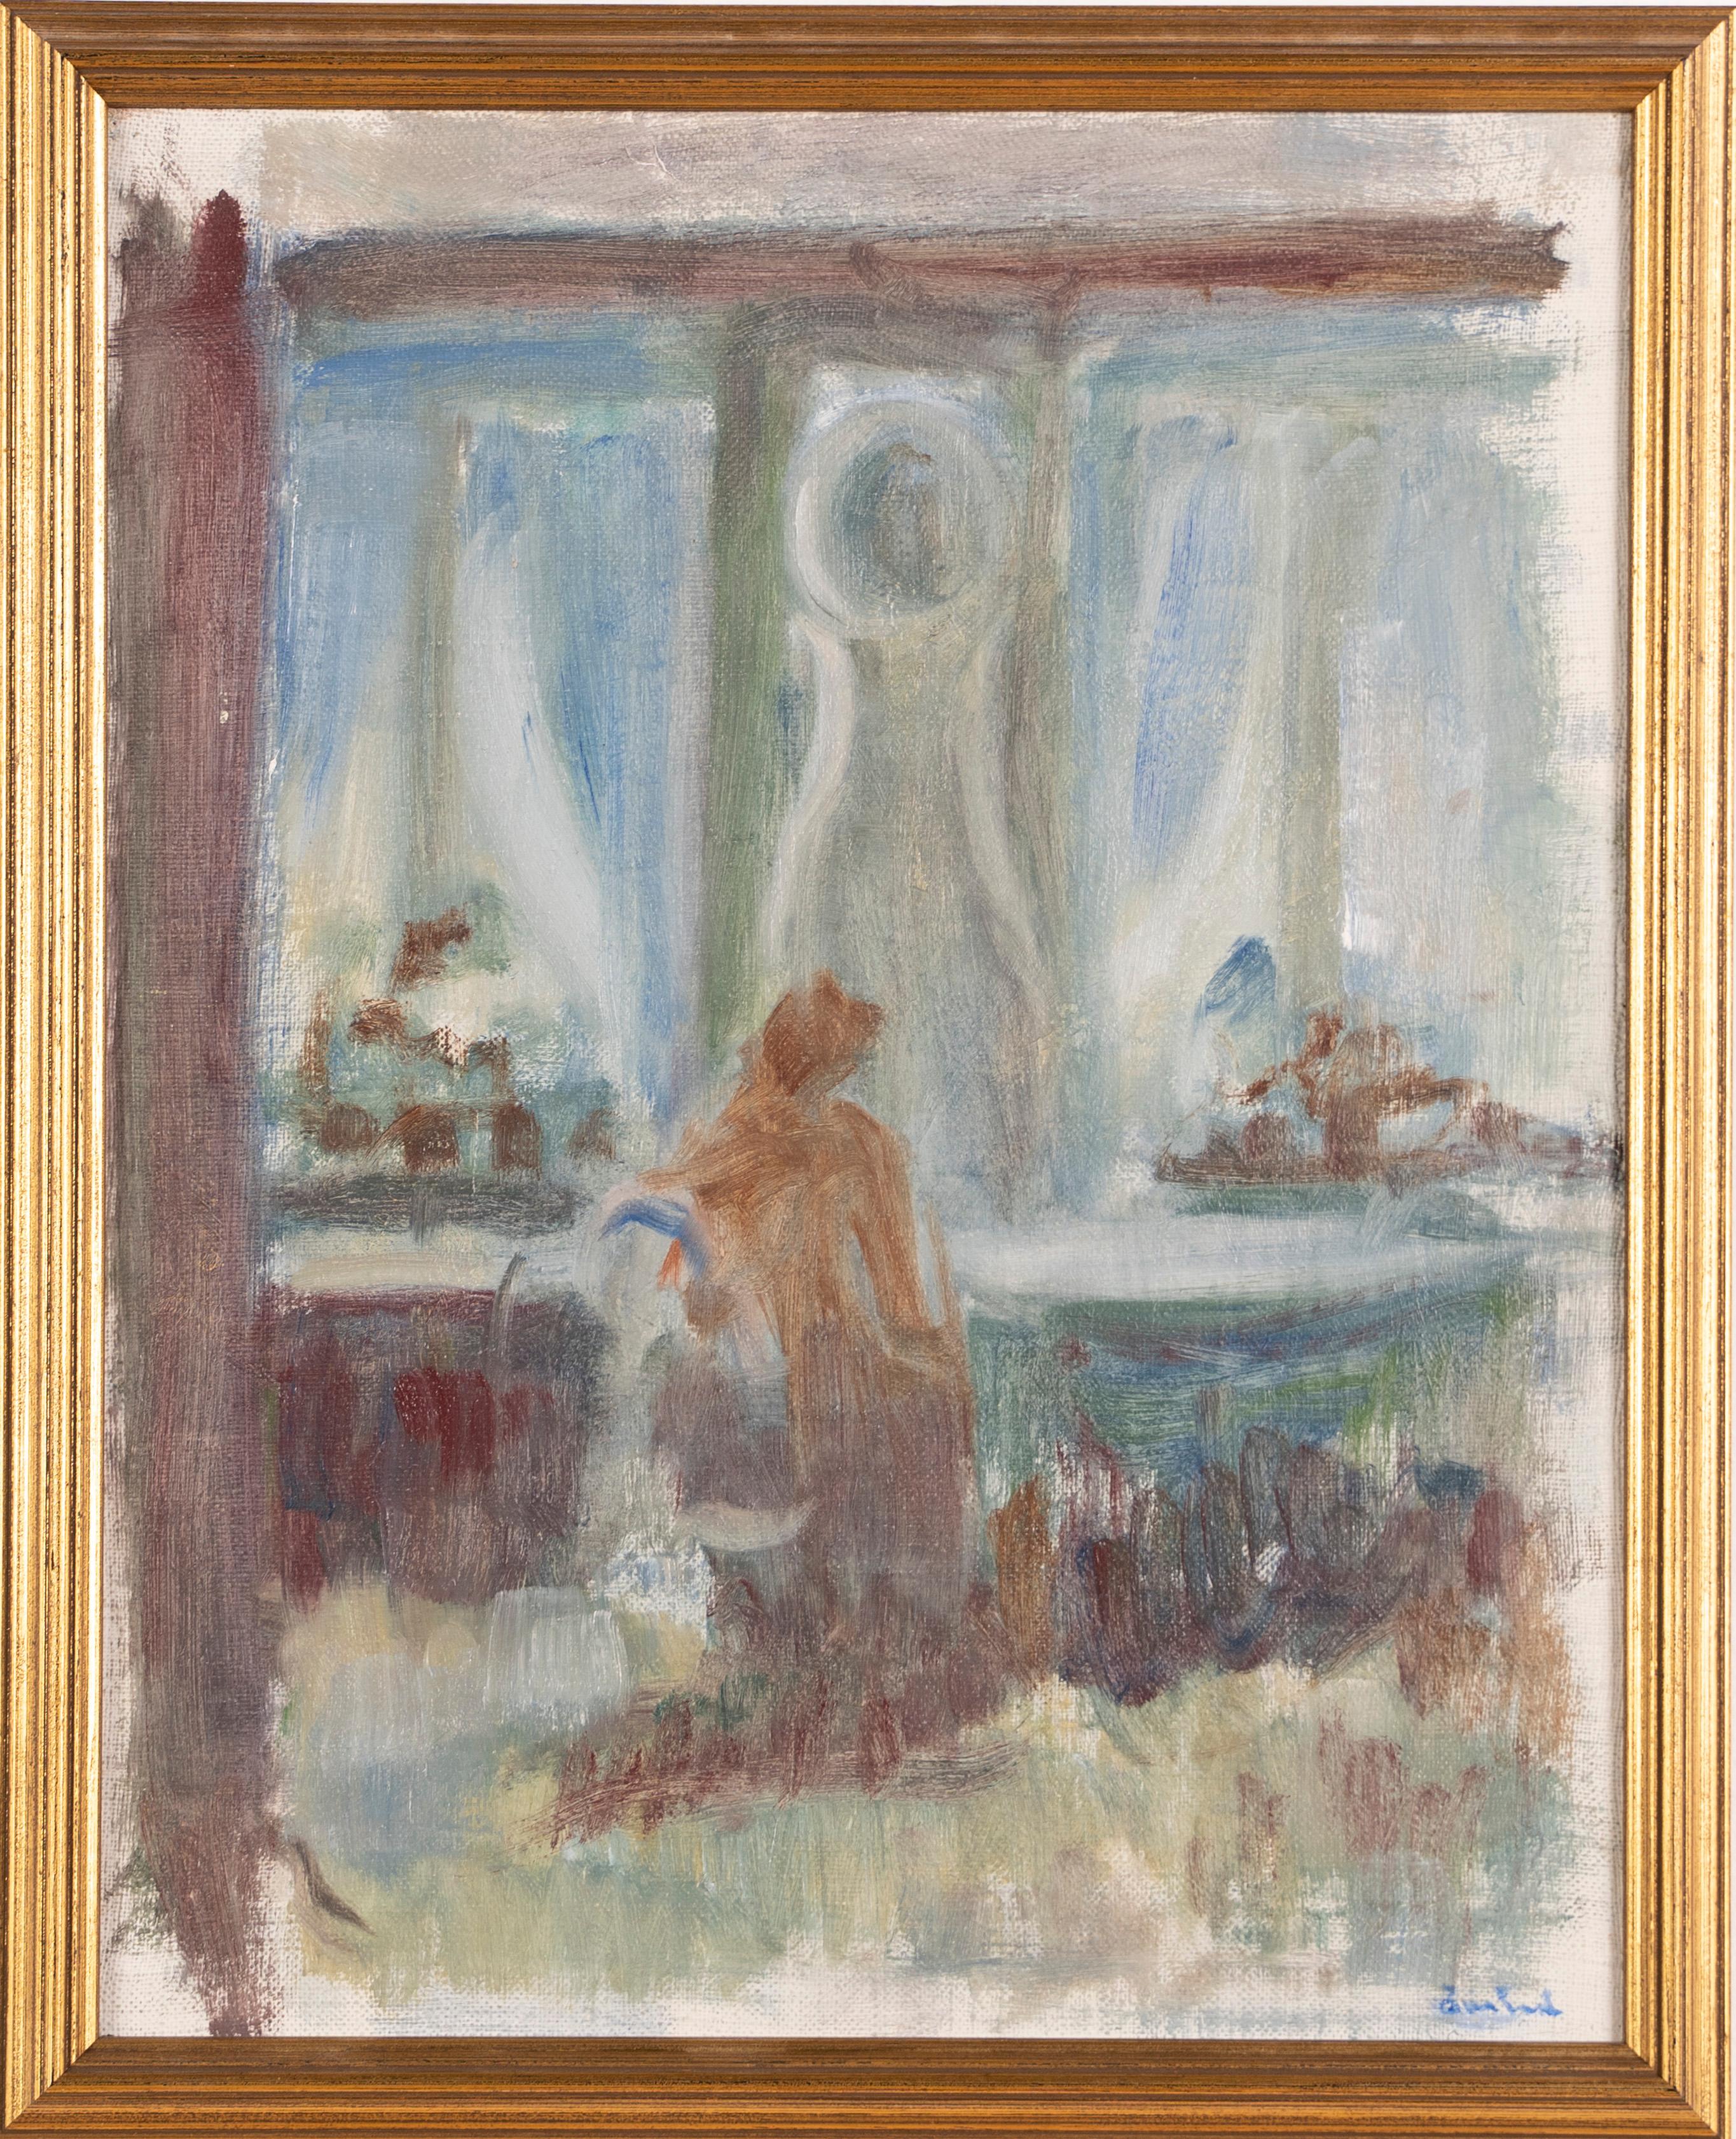 Vintage modernist interior scene painting.  Oil on canvas, lain to board, circa 1940.  Signed.  Image size, 11.5L x 14.5H.  Housed in a period  frame.
